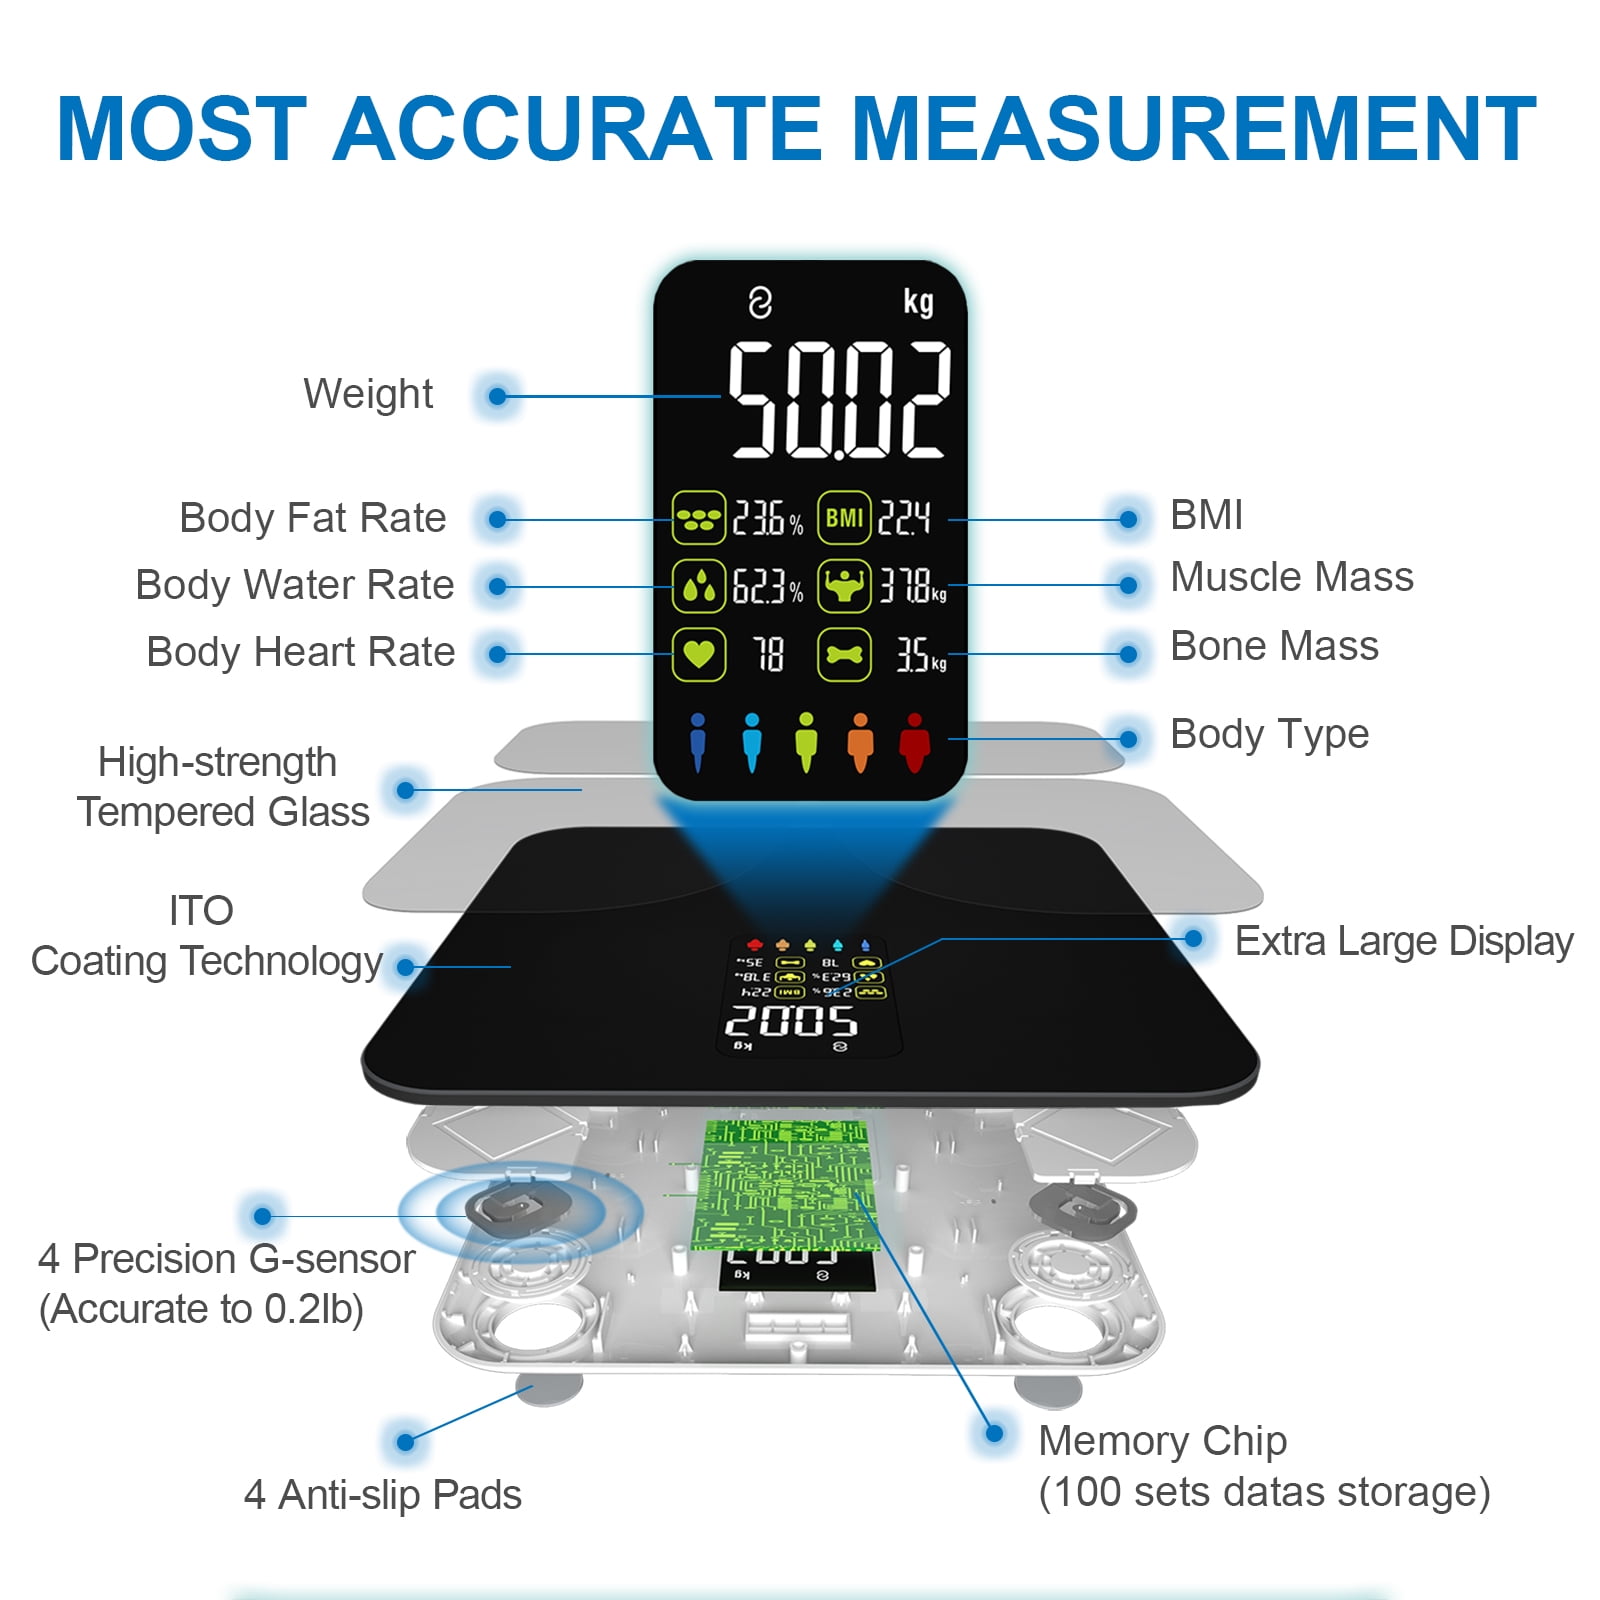 Scales for Body Weight and Fat, Lepulse Large Display Weight Scale